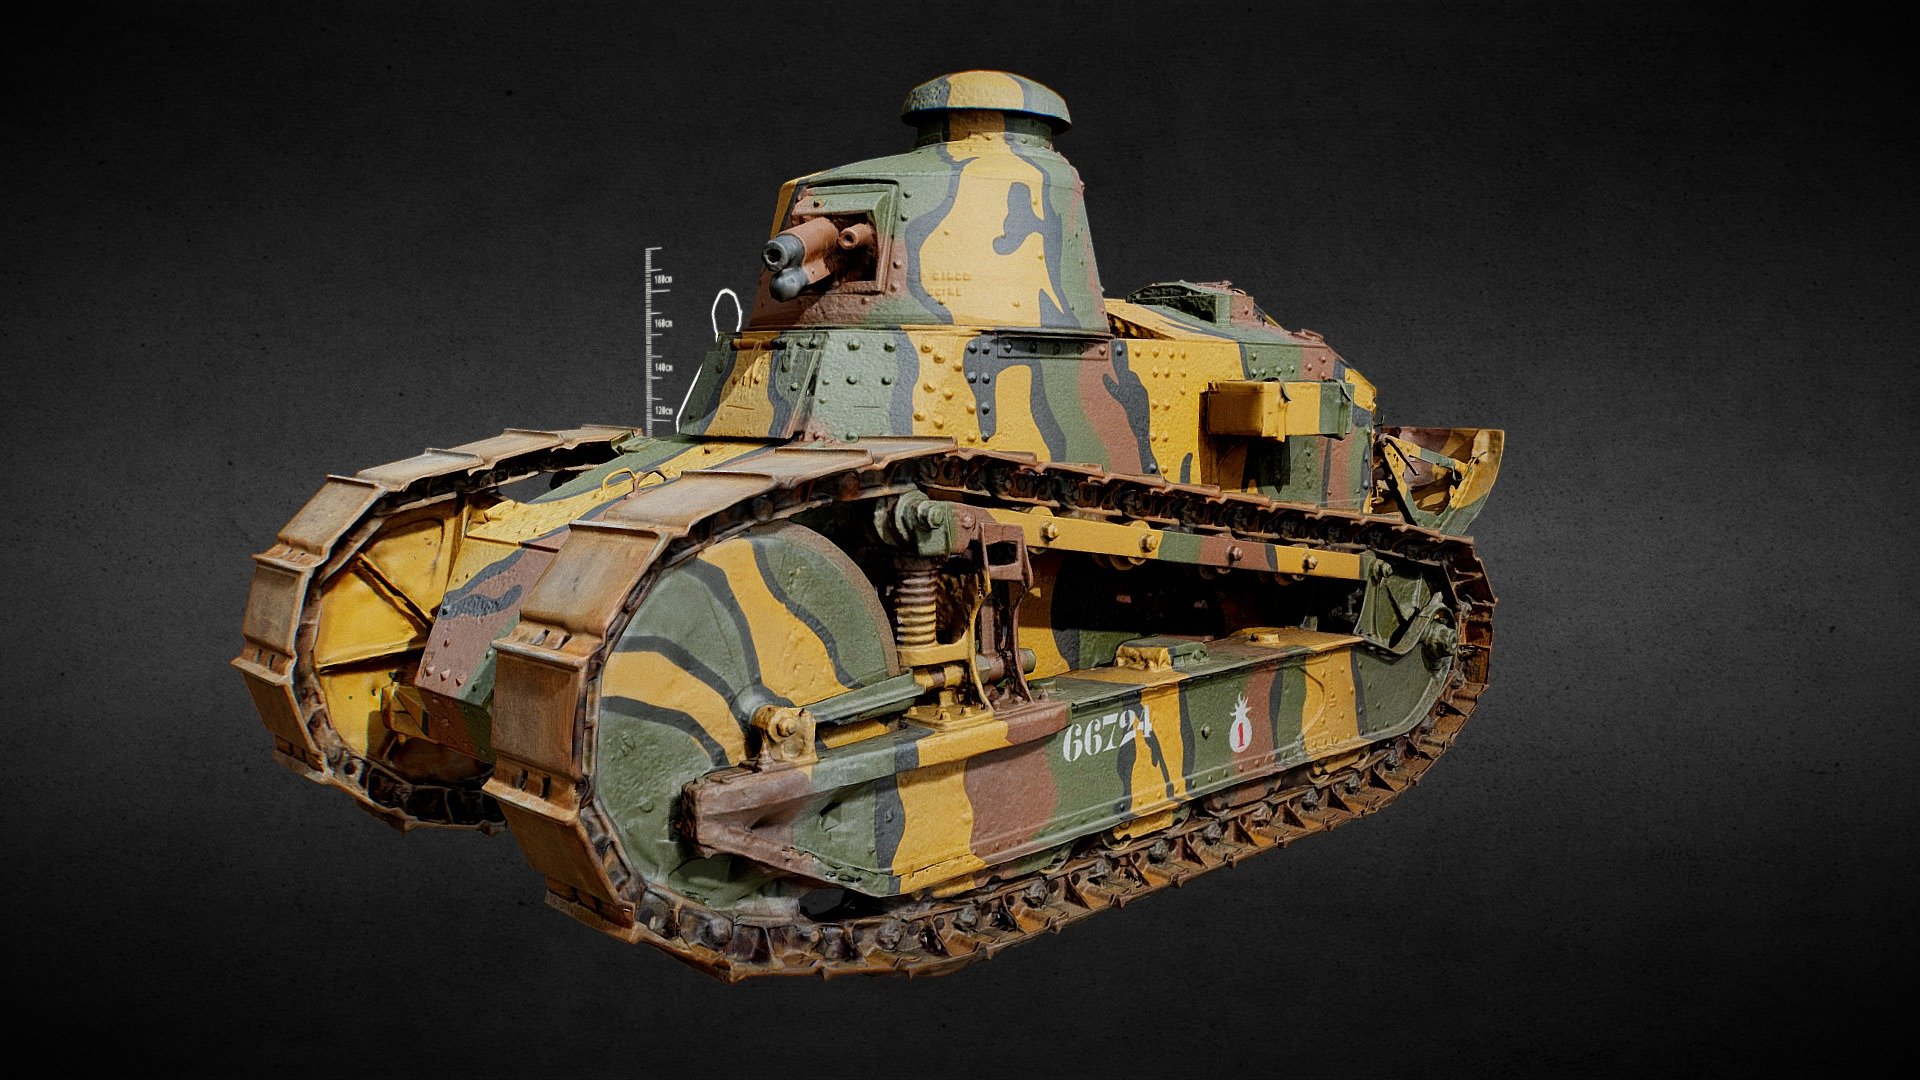 This year is the 100th anniversary of the operational use of the Renault FT, first modern light tank of the History ! (1918).

We had the chance to do a quick photogrammetry scan of this awesome piece of History. We uploaded a light version of the scan, to make it visible on most devices.

You can visit  The Museum of the Armored Vehicles of Saumur to check the real world tank !

Ce tank est actuellement exposé au Musée des Blindés de Saumur 


Thanks to Lieutnant Colonel Pierre Garnier de Labareyre, and all the Museum team 3d model